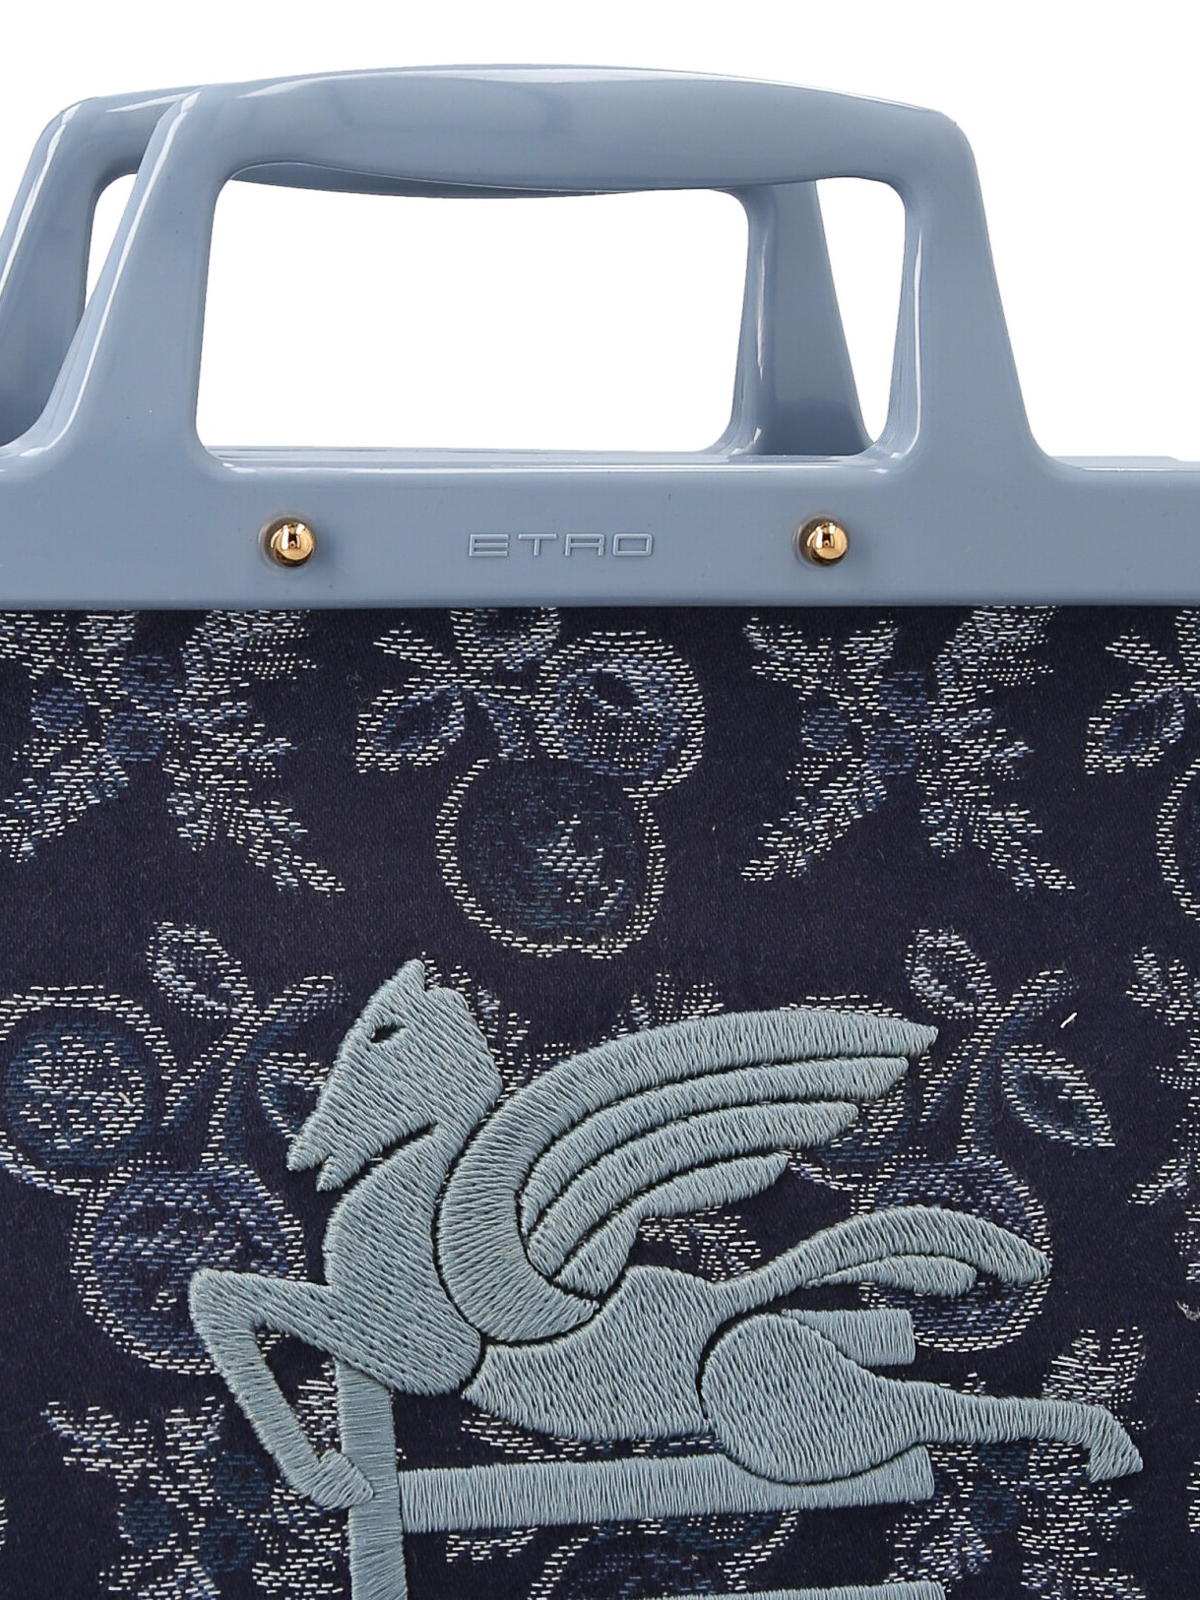 ETRO Large Love Trotter Tote Bag - Farfetch